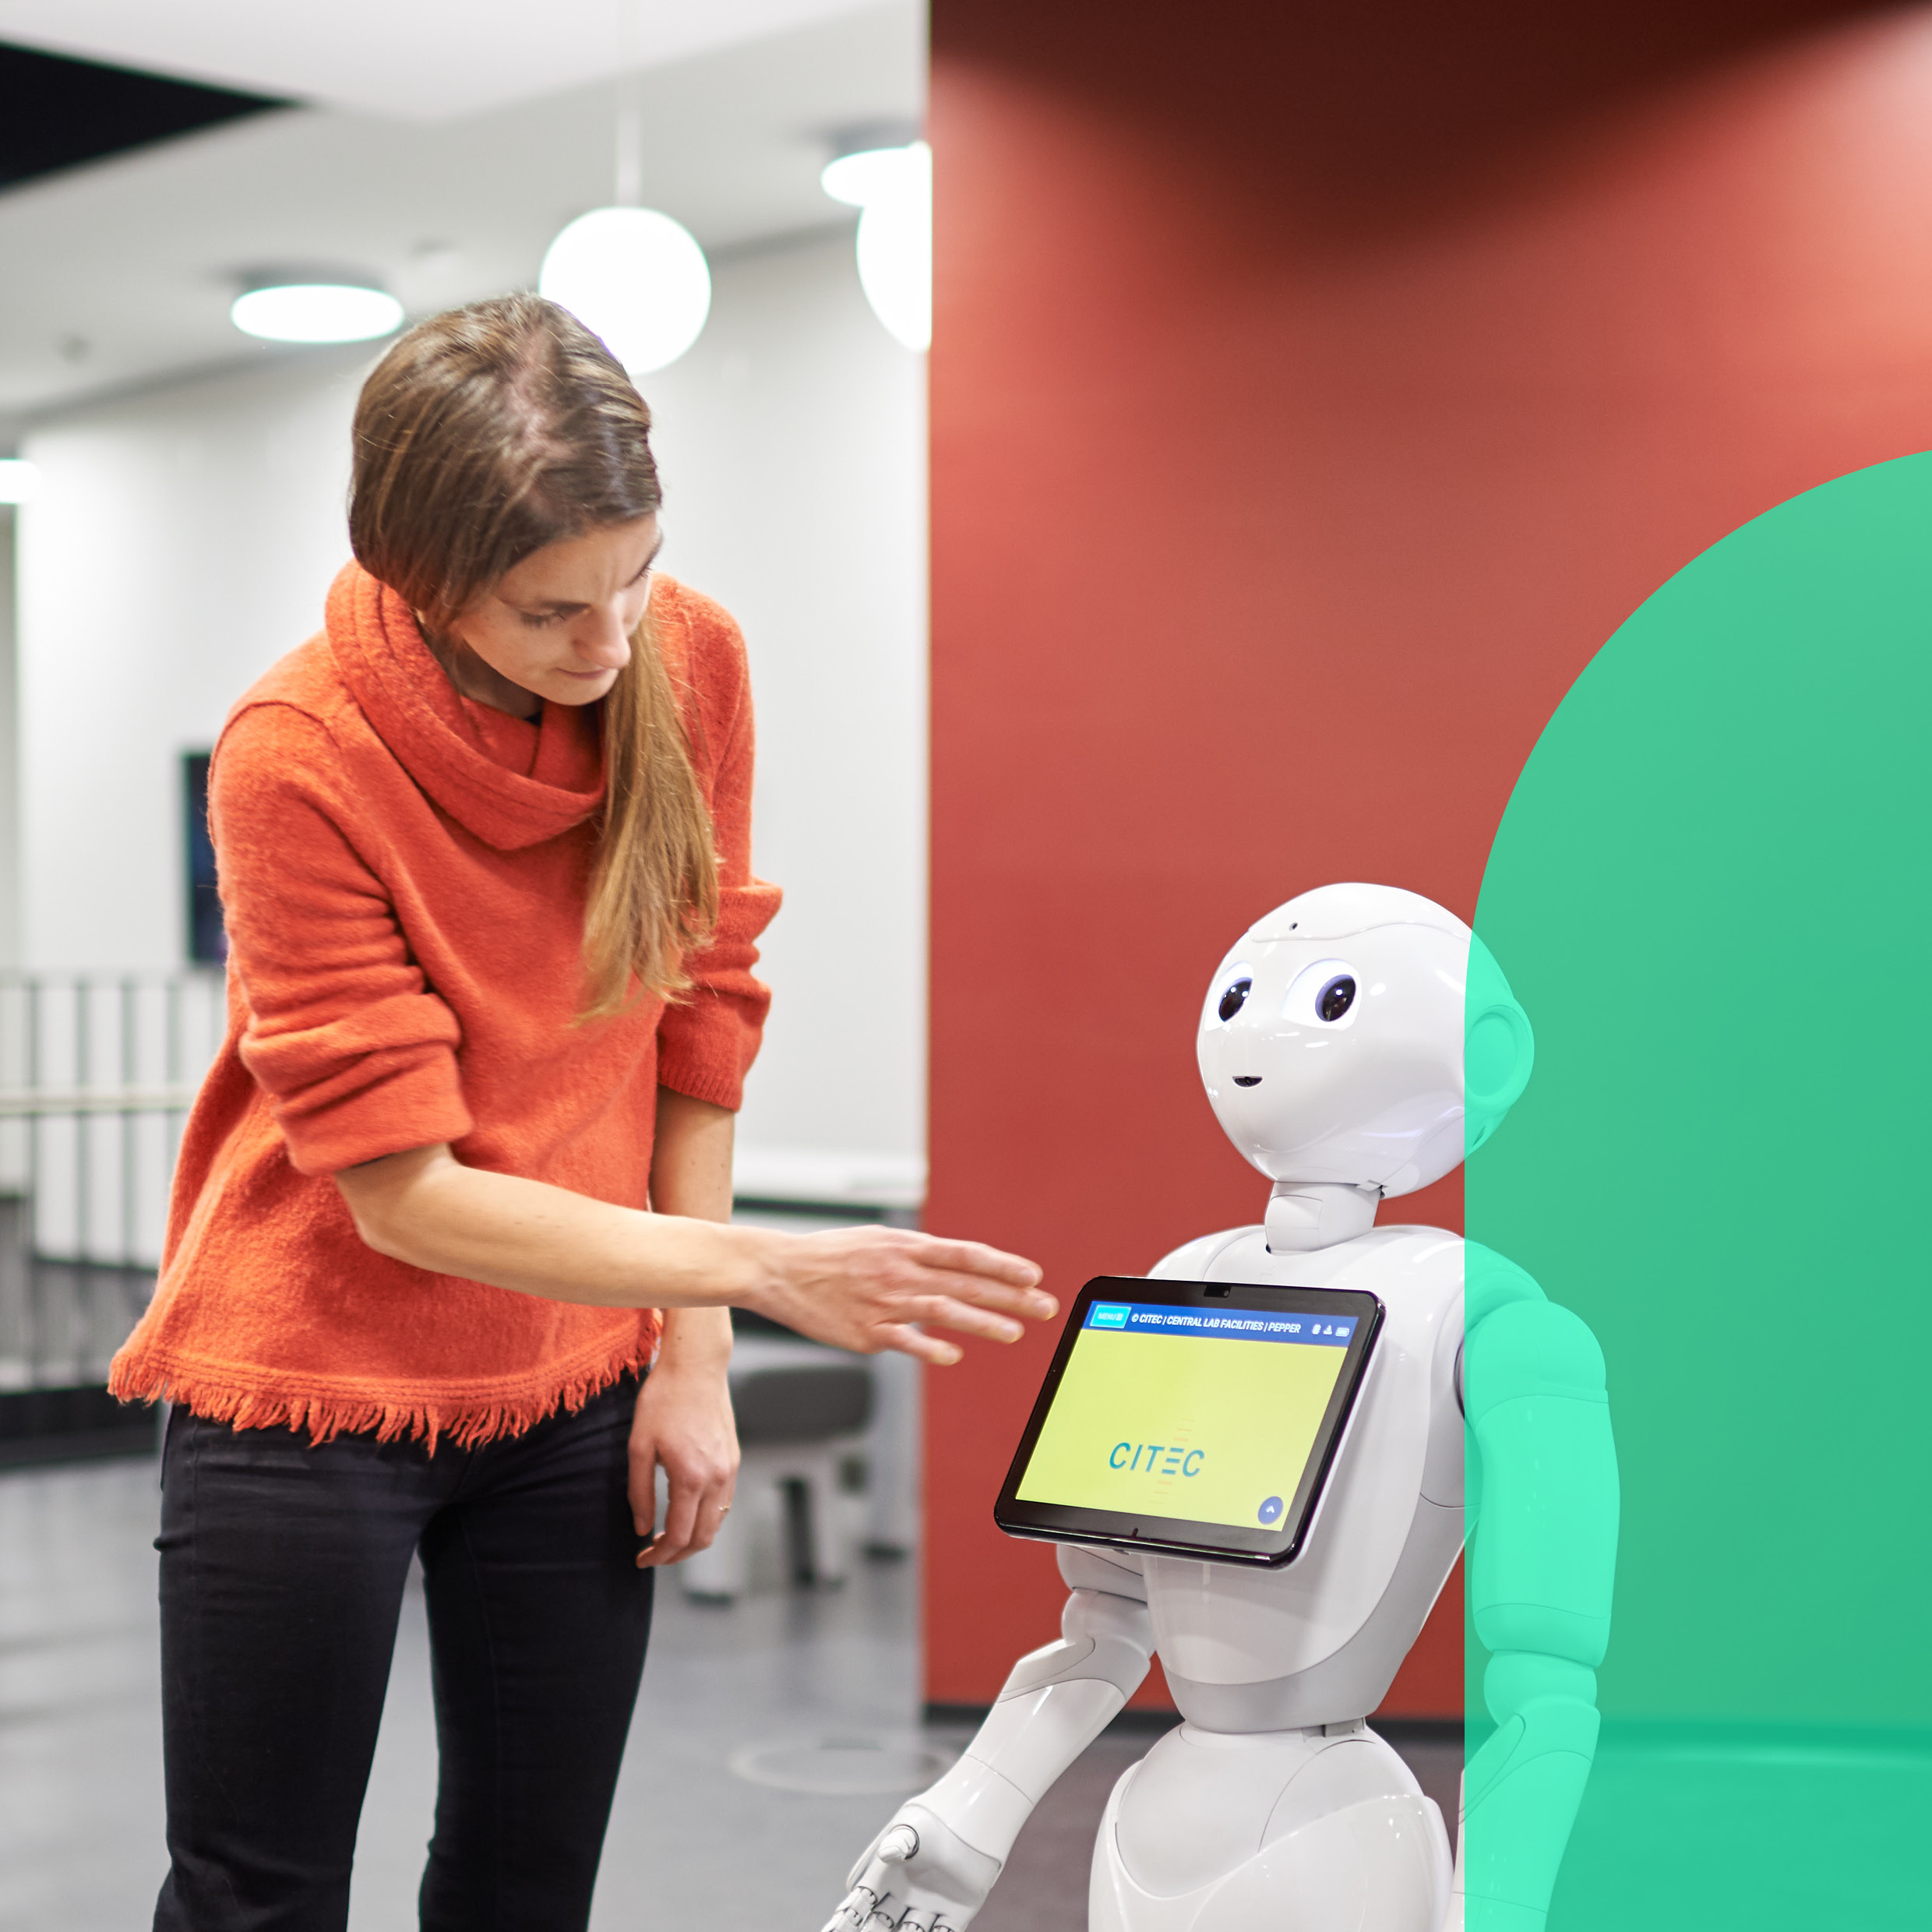 Woman researcher operates the display of a service robot